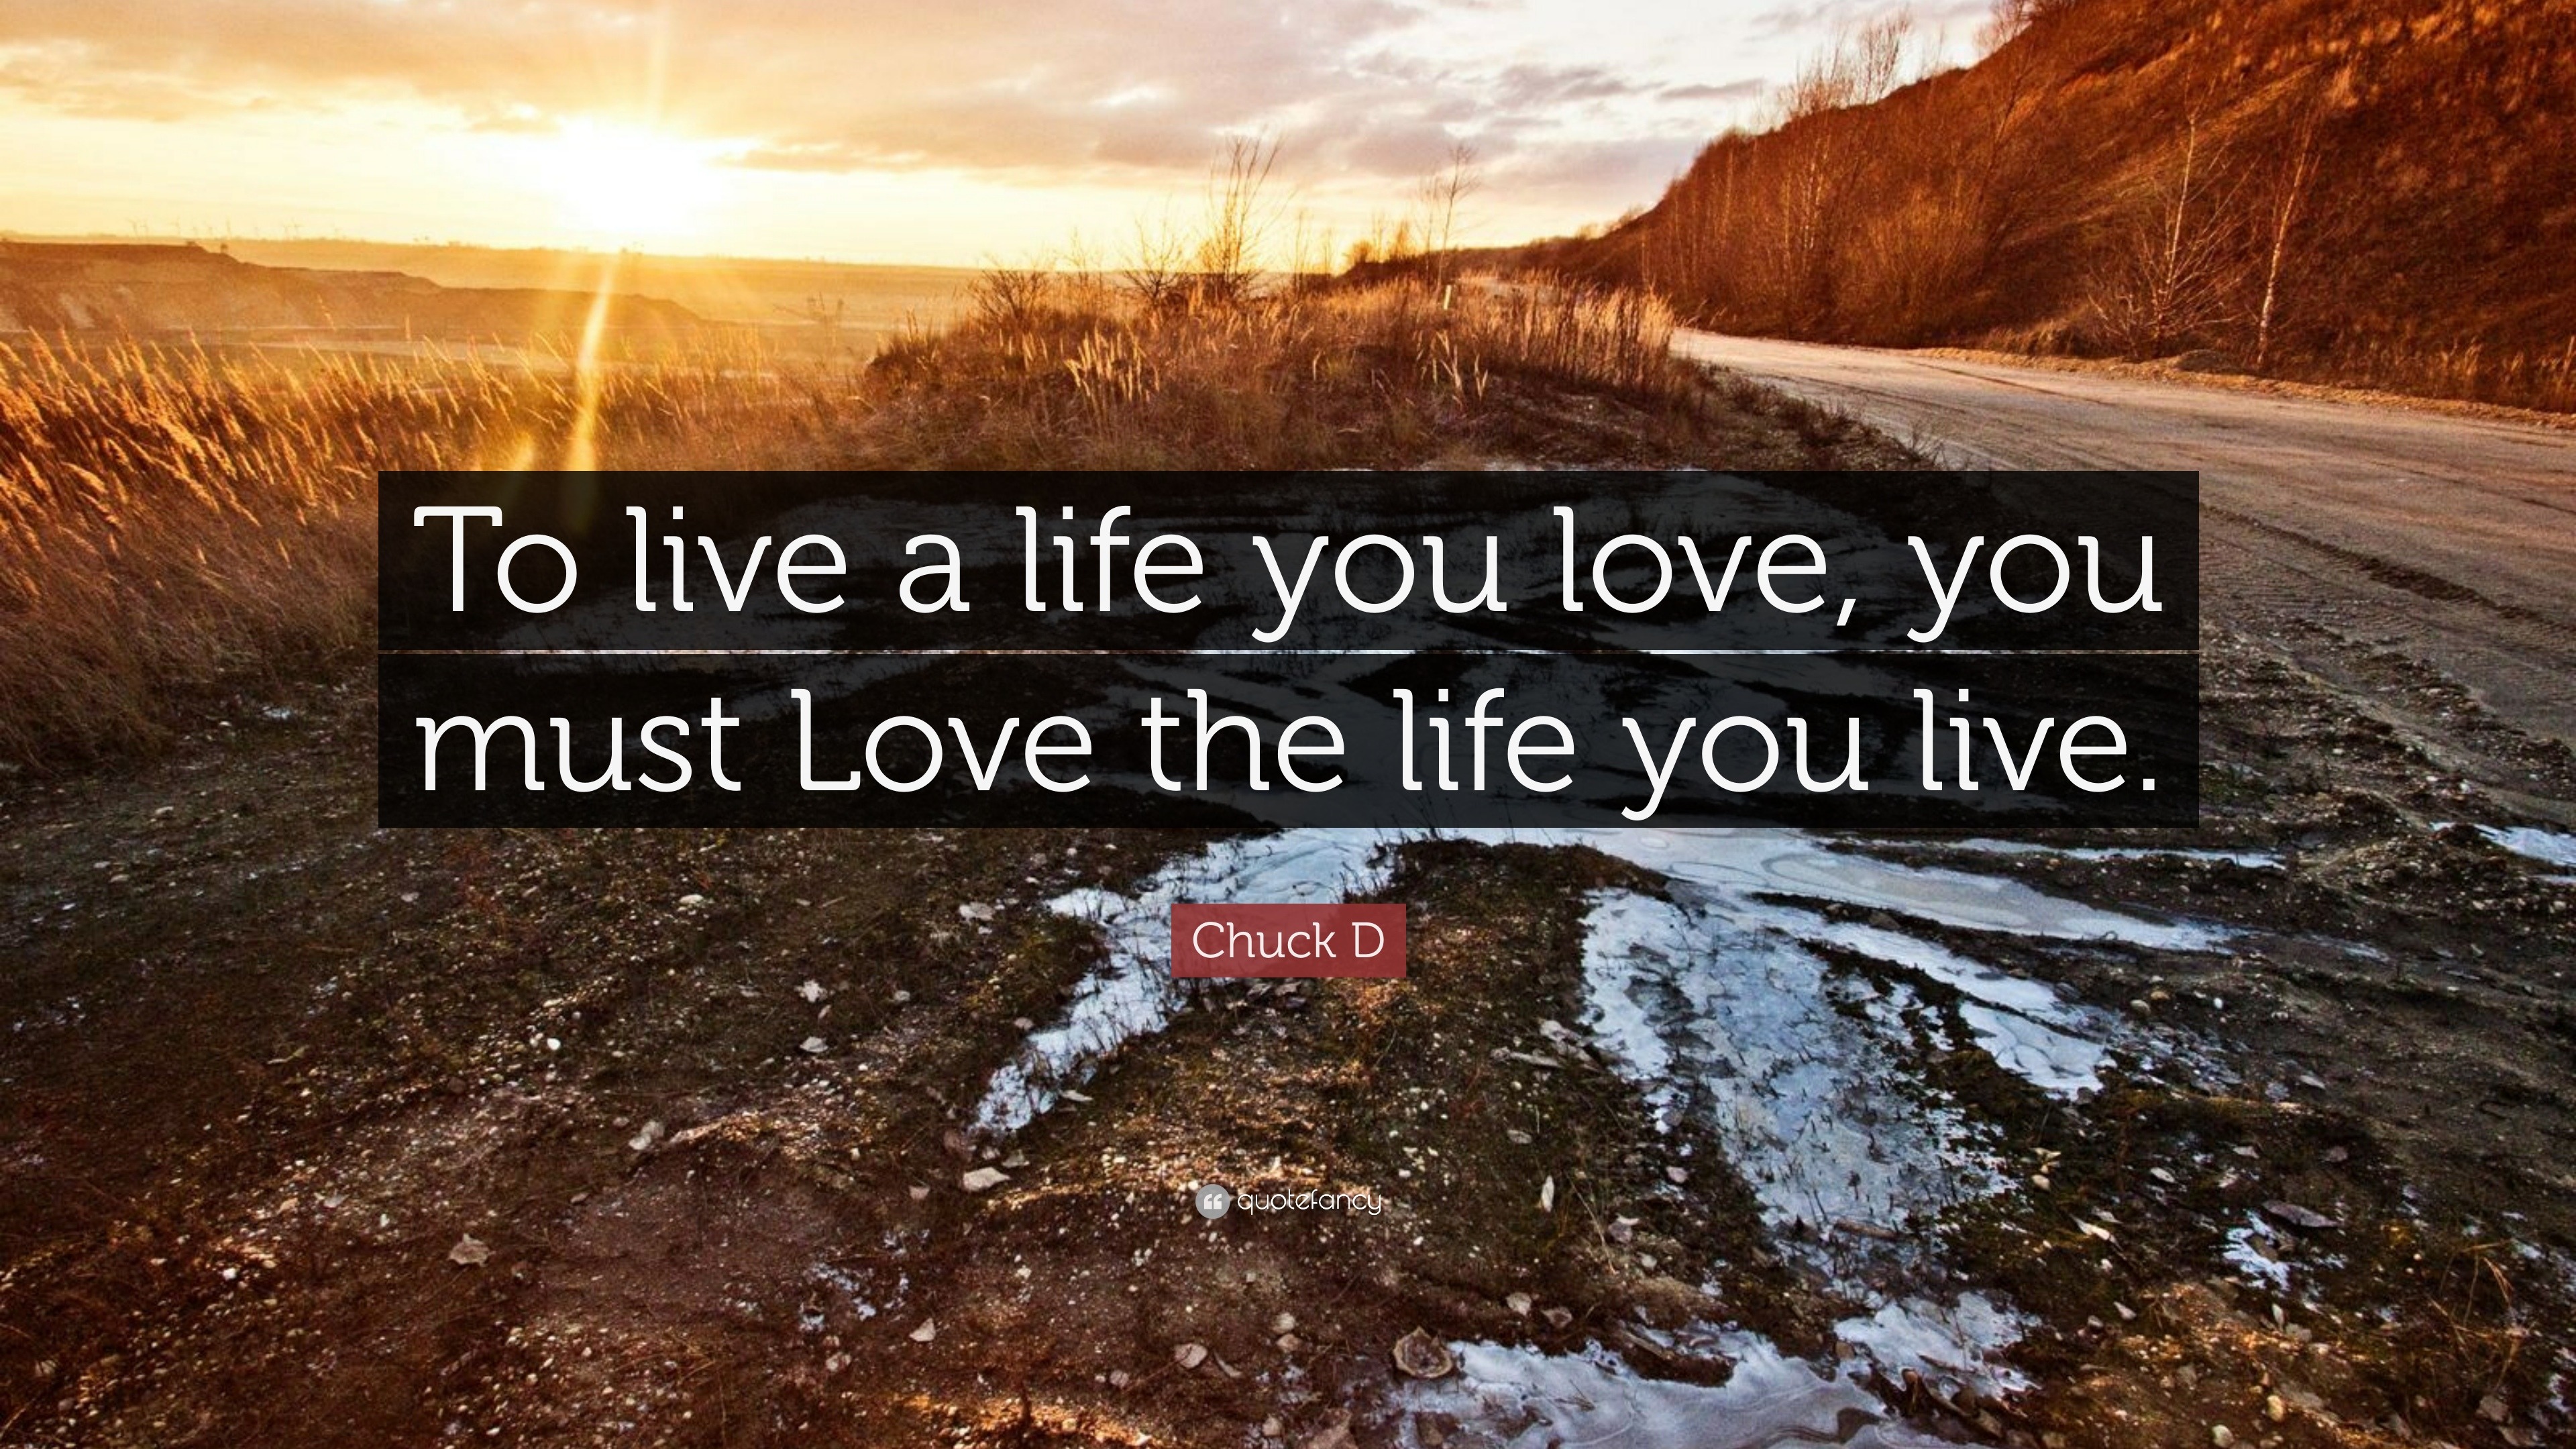 Chuck D Quote To Live A Life You Love You Must Love The Life You Live